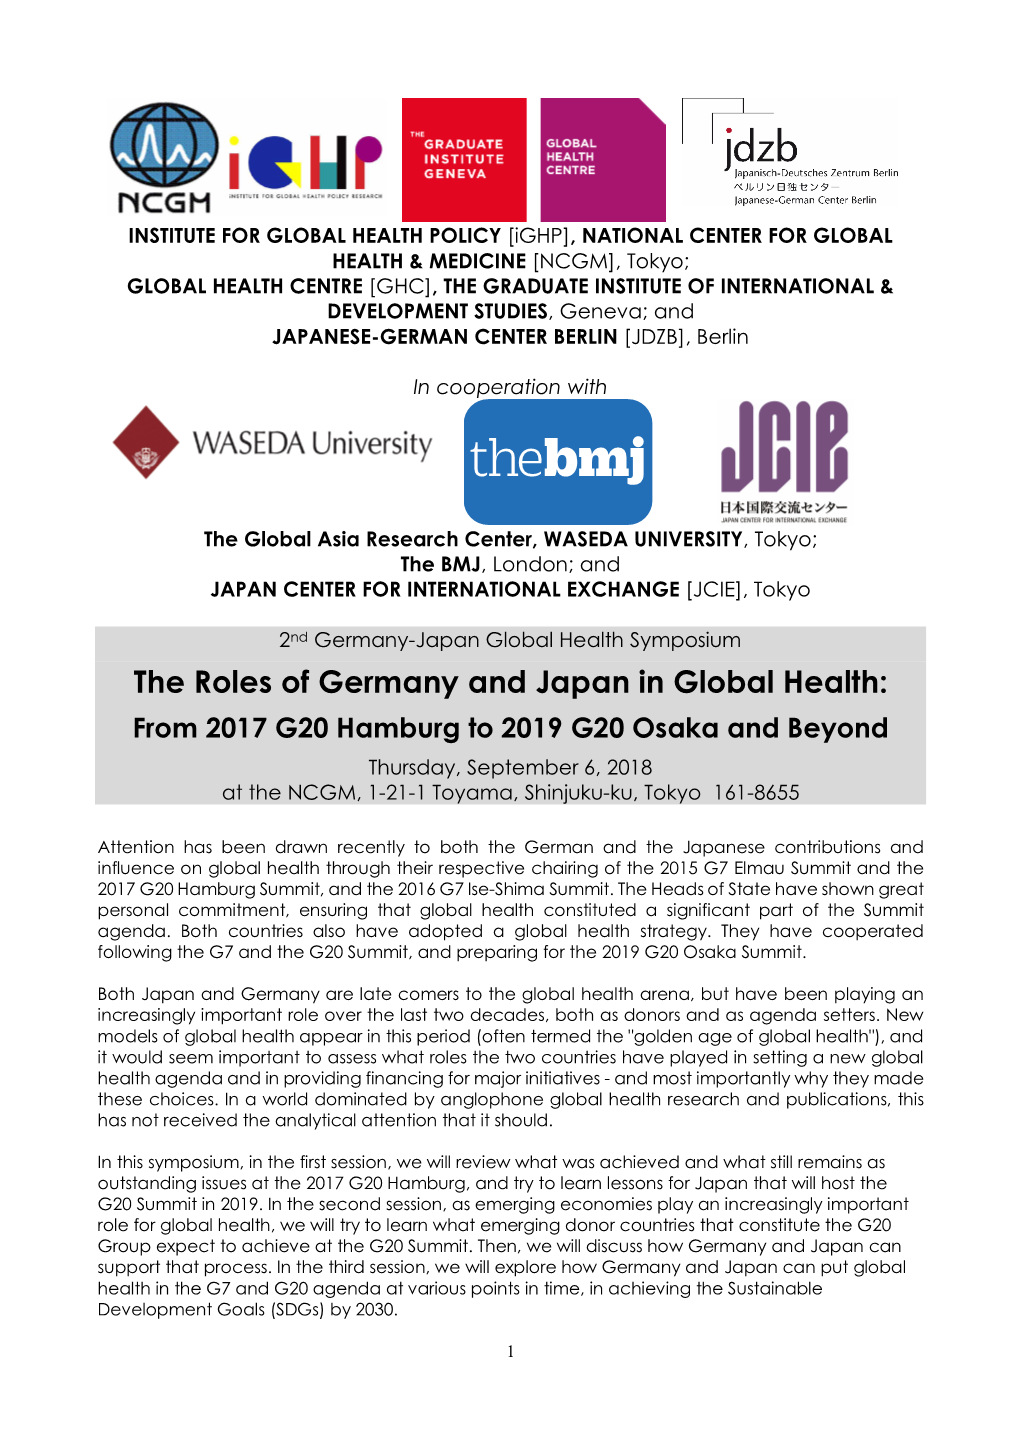 The Roles of Germany and Japan in Global Health